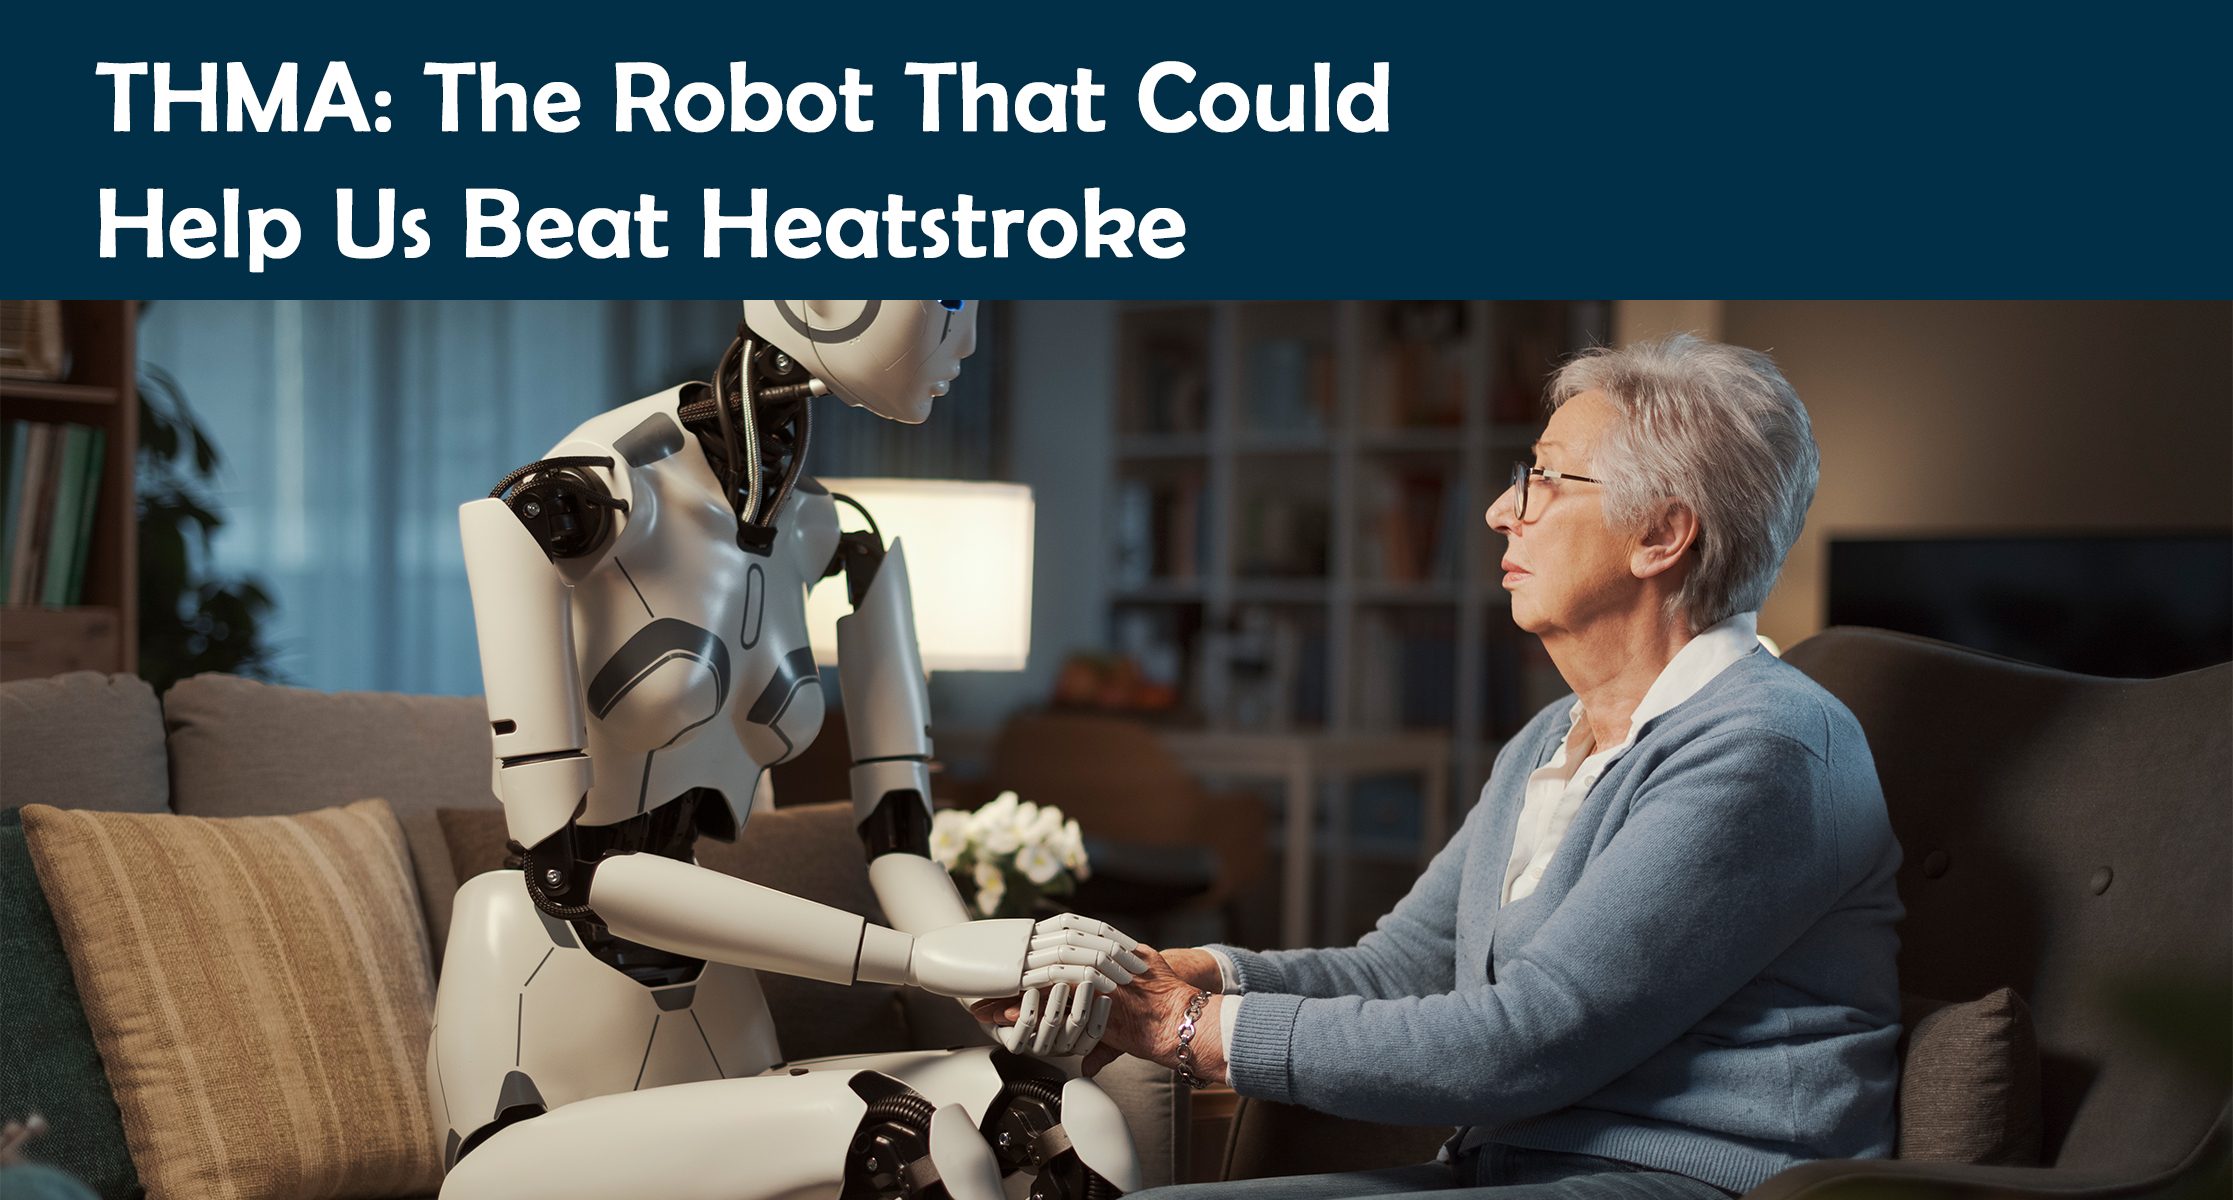 THMA: The Robot That Could Help Us Beat Heatstroke